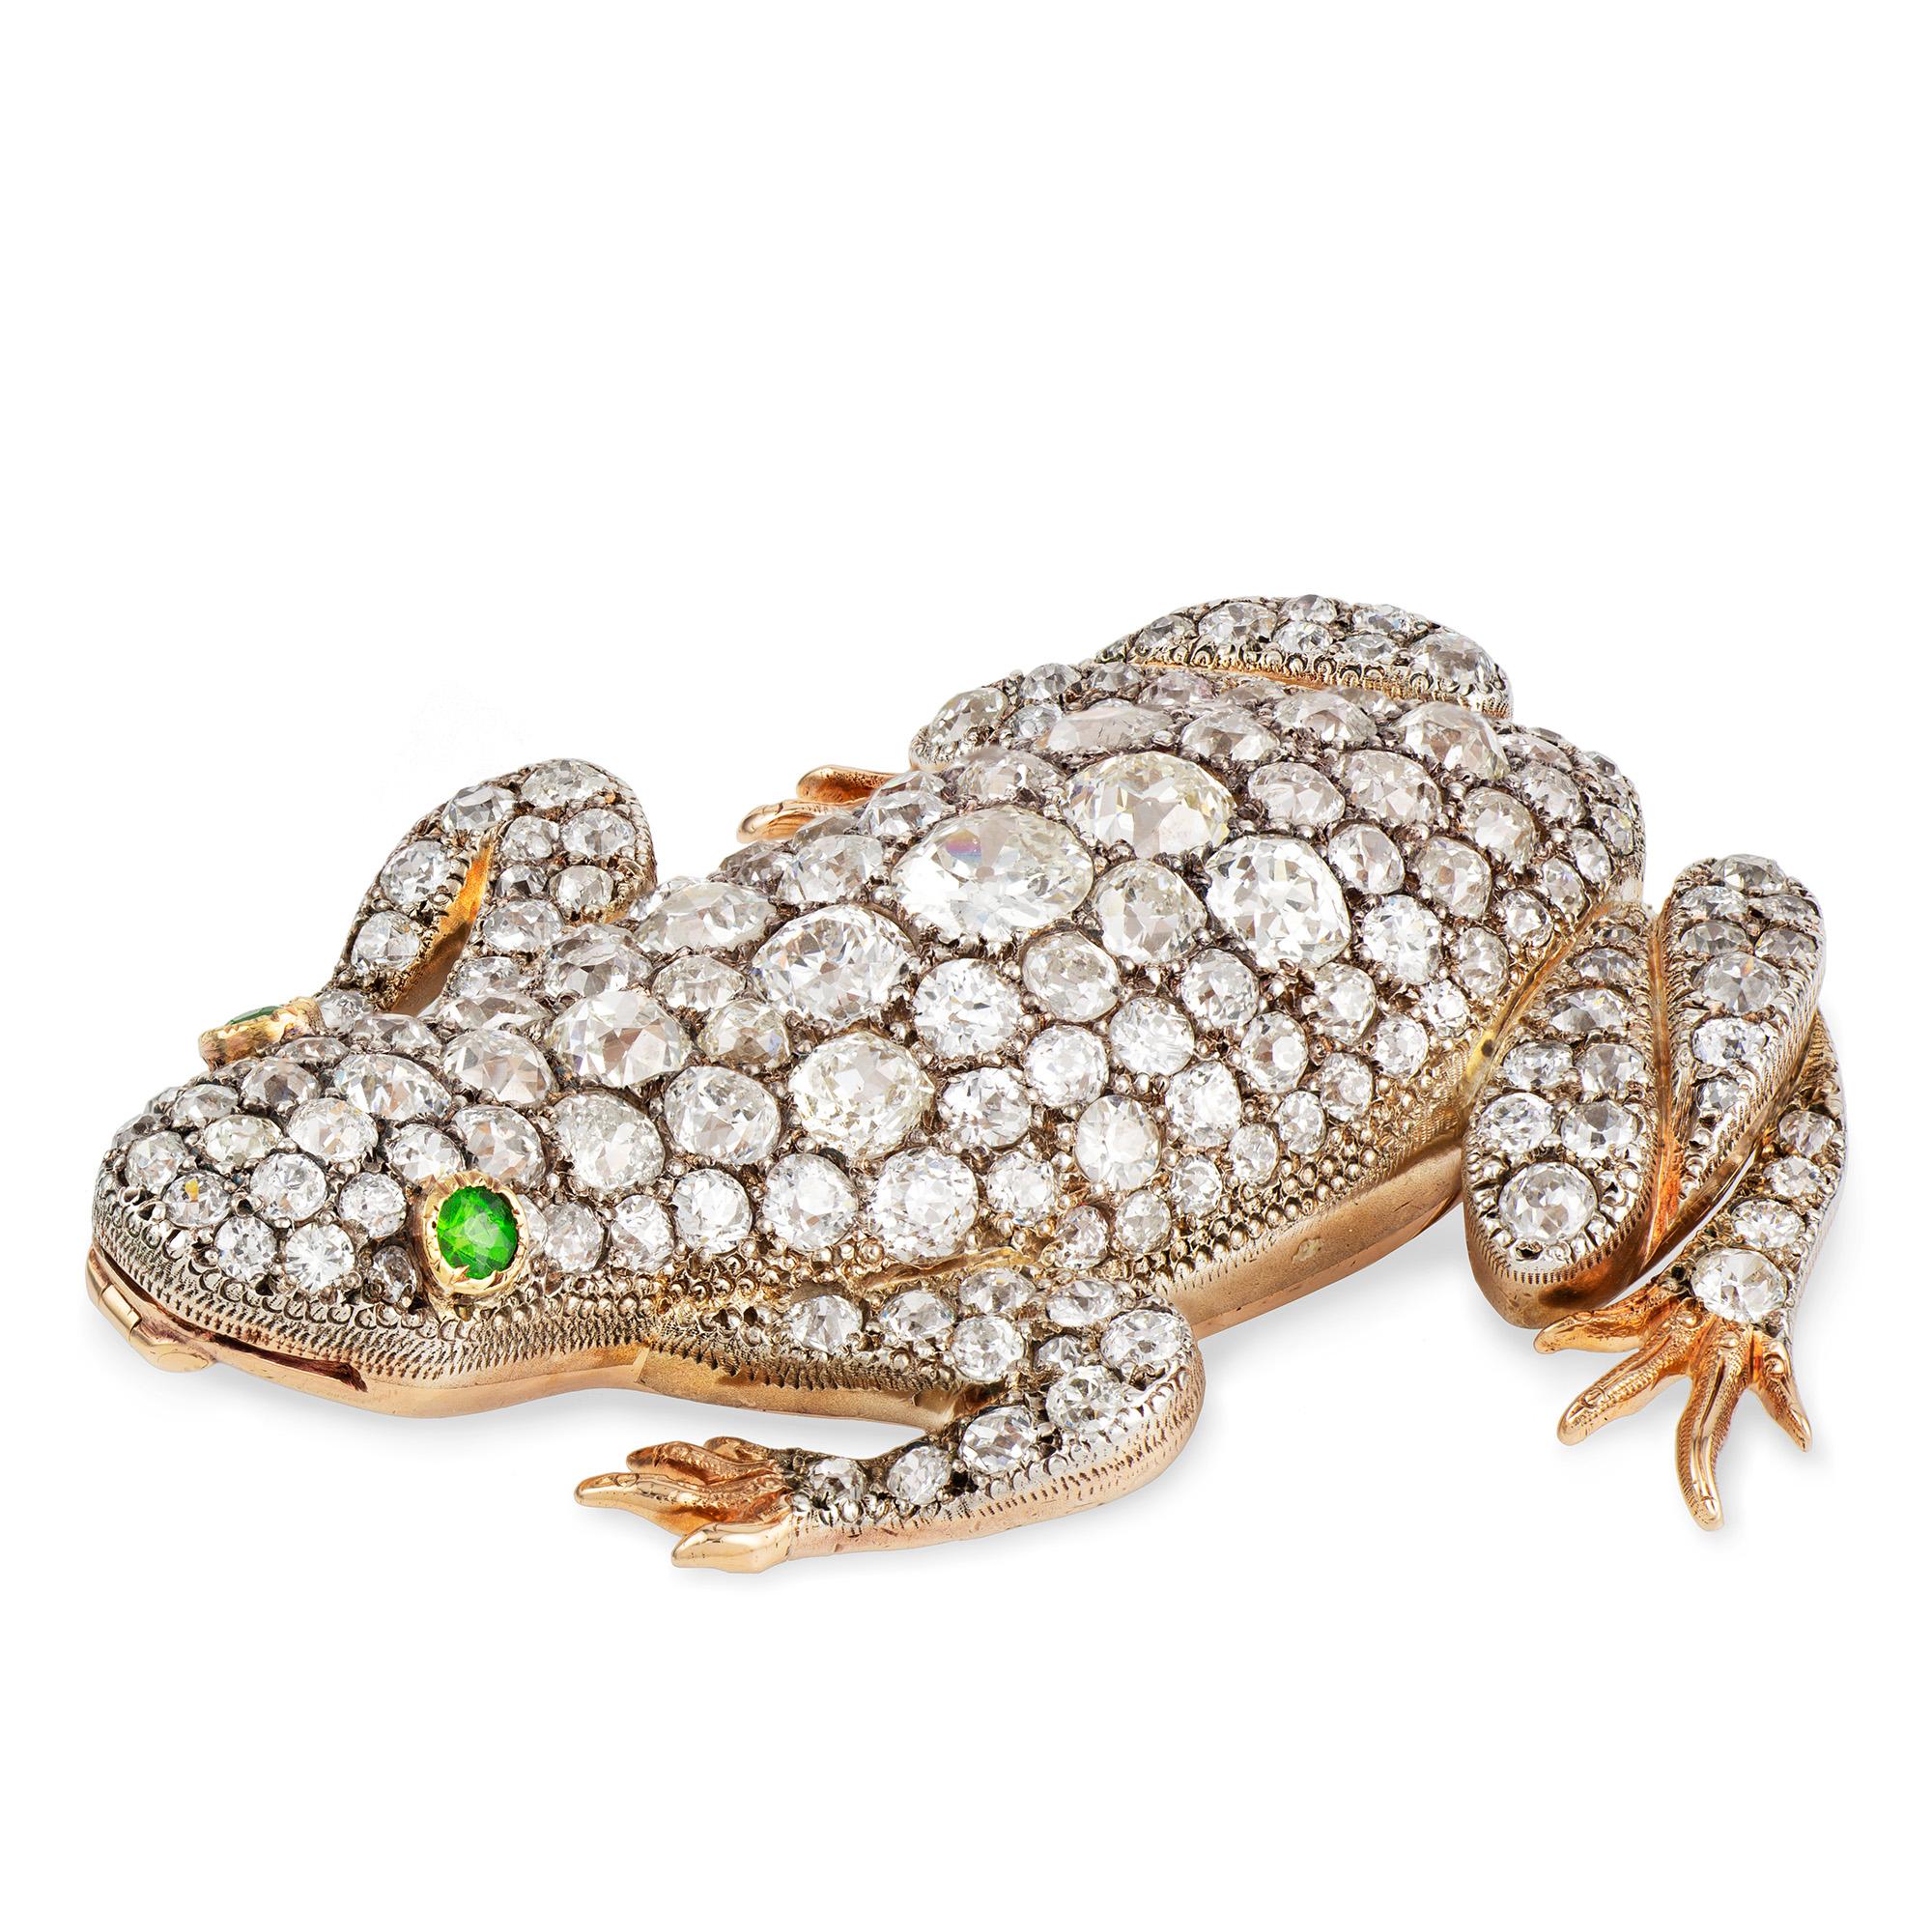 An impressive Victorian diamond-set frog, the realistically carved body set with old European-cut diamonds estimated to weigh a total of 24 carats, and faceted demantoid garnet-set eyes, all mounted in silver on red-gold back, with gold brooch and